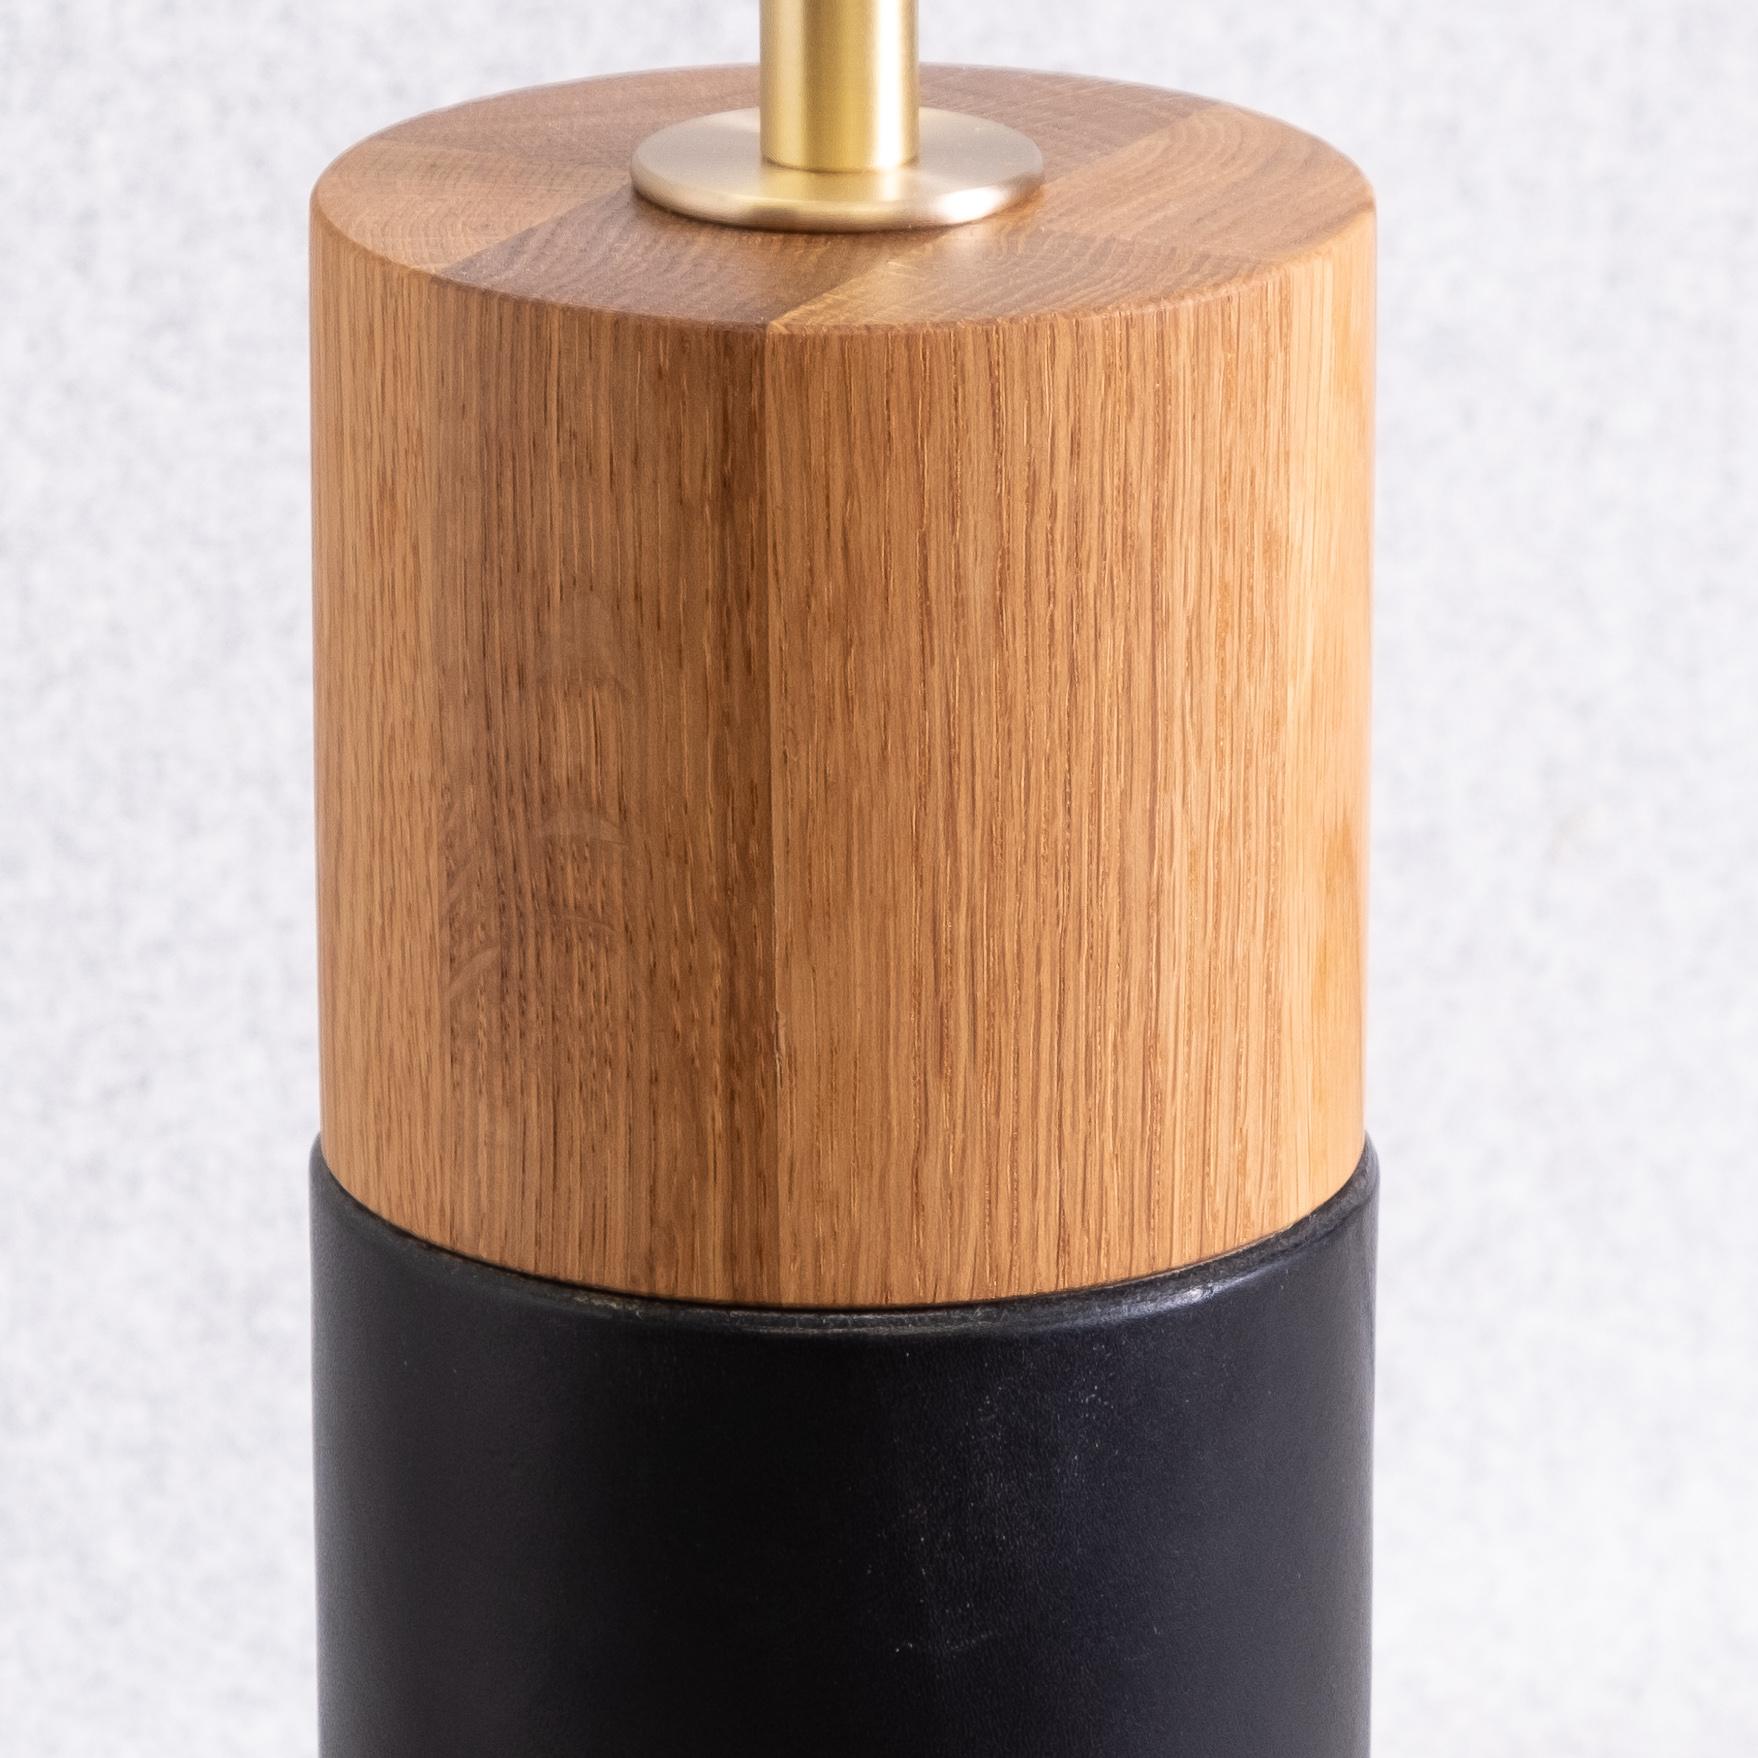 Minimalist Table Lamp with Leather-Wrapped Cylindrical White Oak Base In New Condition For Sale In Ottawa, CA